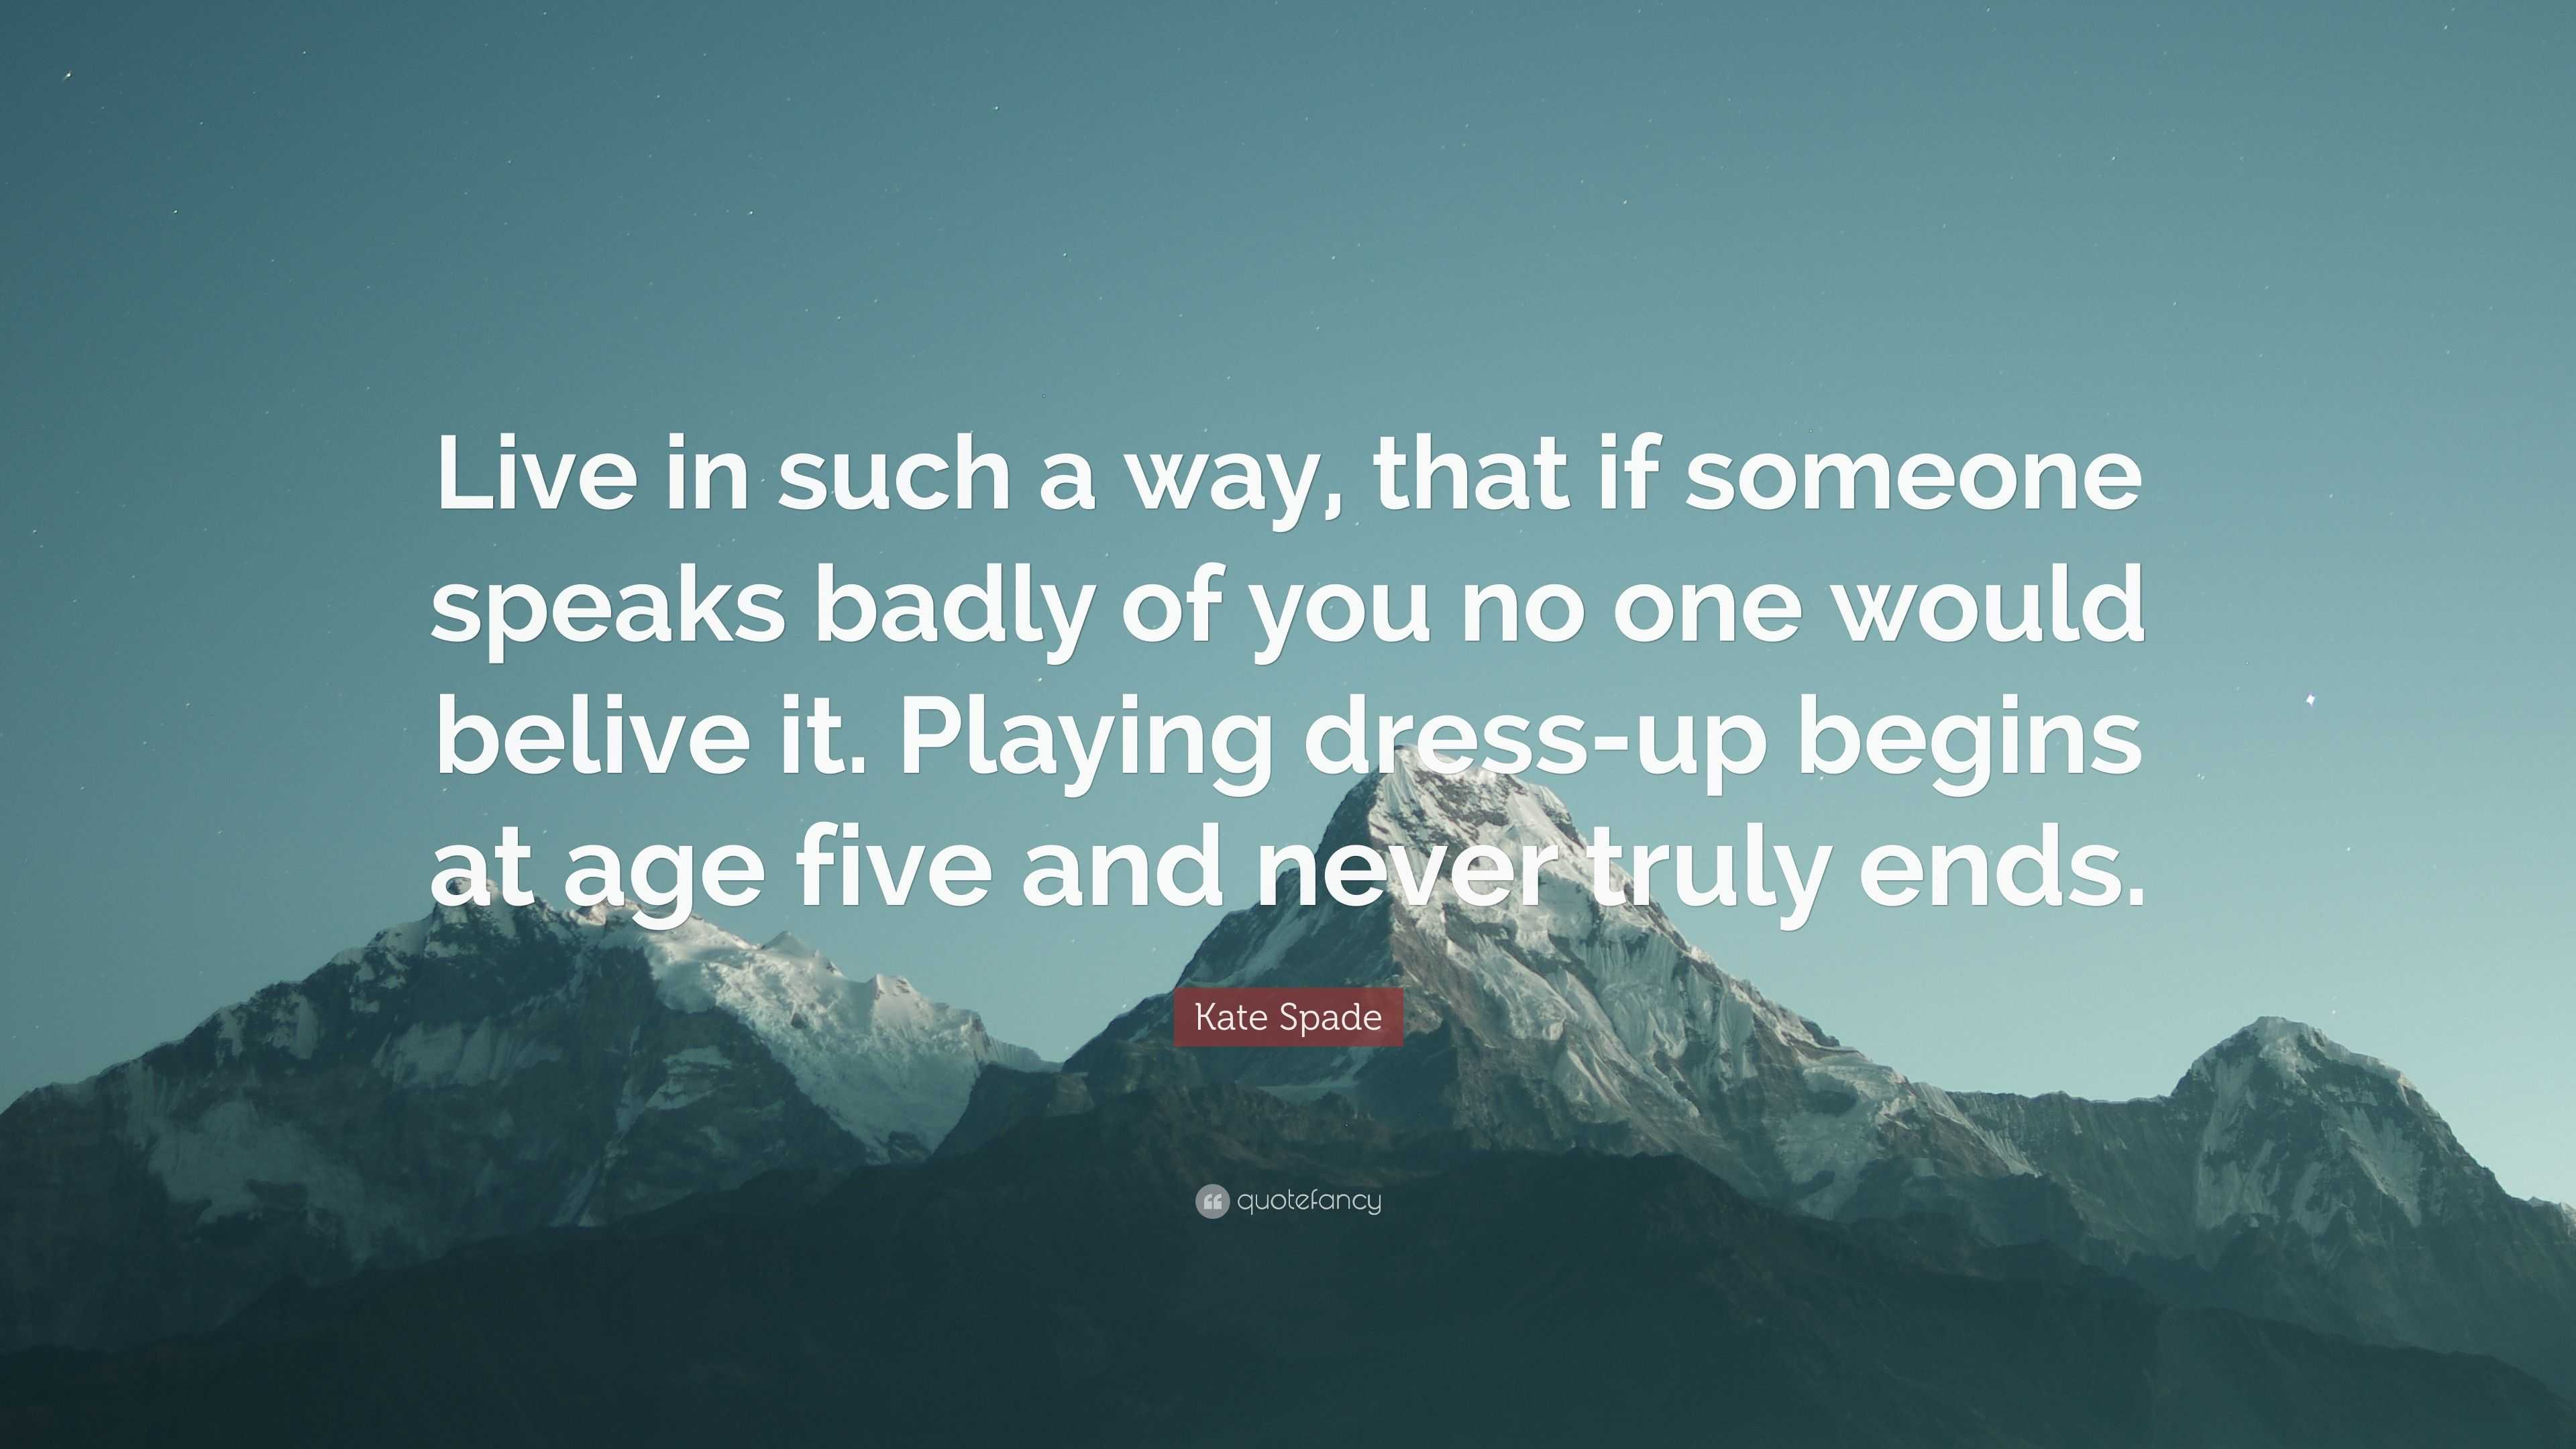 Kate Spade Quote: “Live in such a way, that if someone speaks badly of you  no one would belive it. Playing dress-up begins at age five and ...”